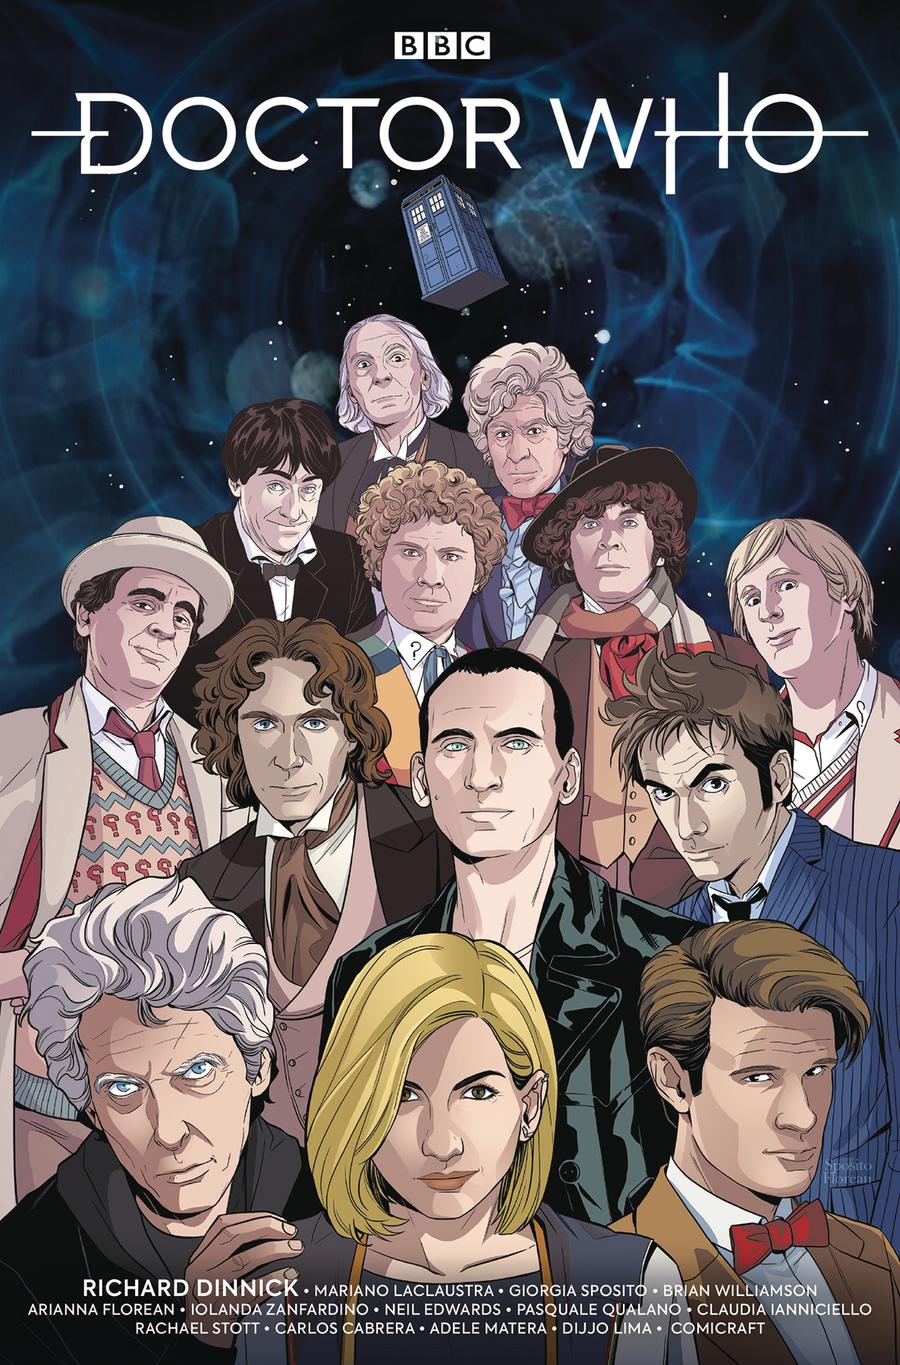 Doctor Who 13th Doctor #0 Cover C NYCC Exclusive Giorgia Sposito & Arianna Florean Variant Cover